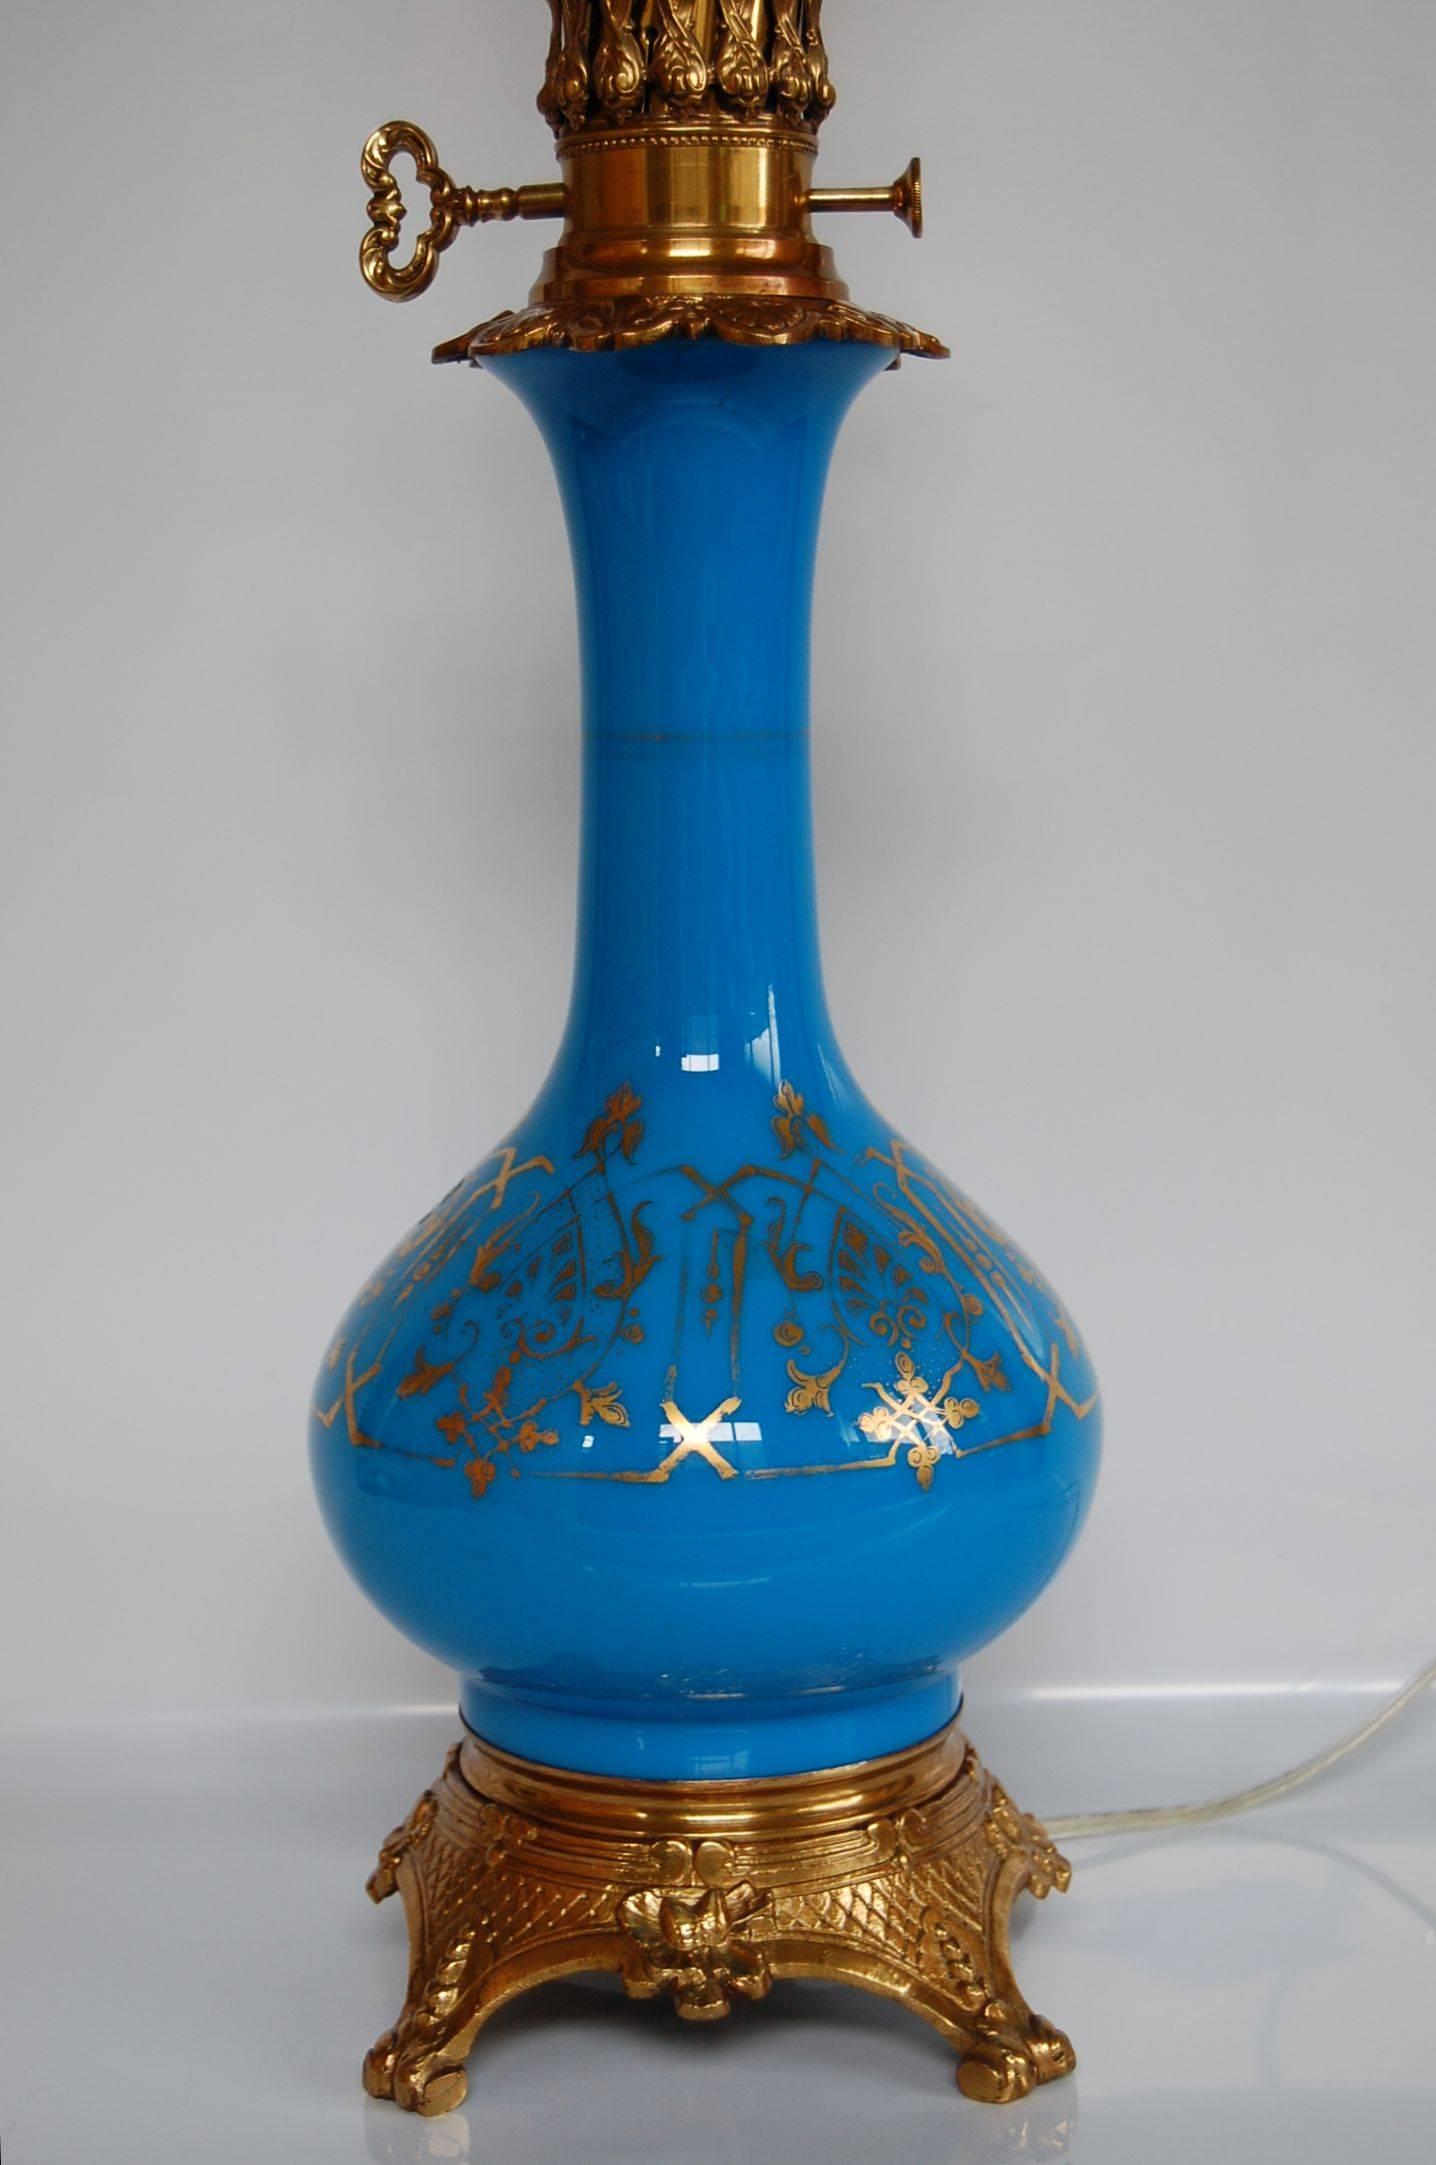 This beautiful lamp has recently been cleaned, polished and rewired with a three way socket. The blue glass is stunning and the gold leaf decoration is in excellent condition.